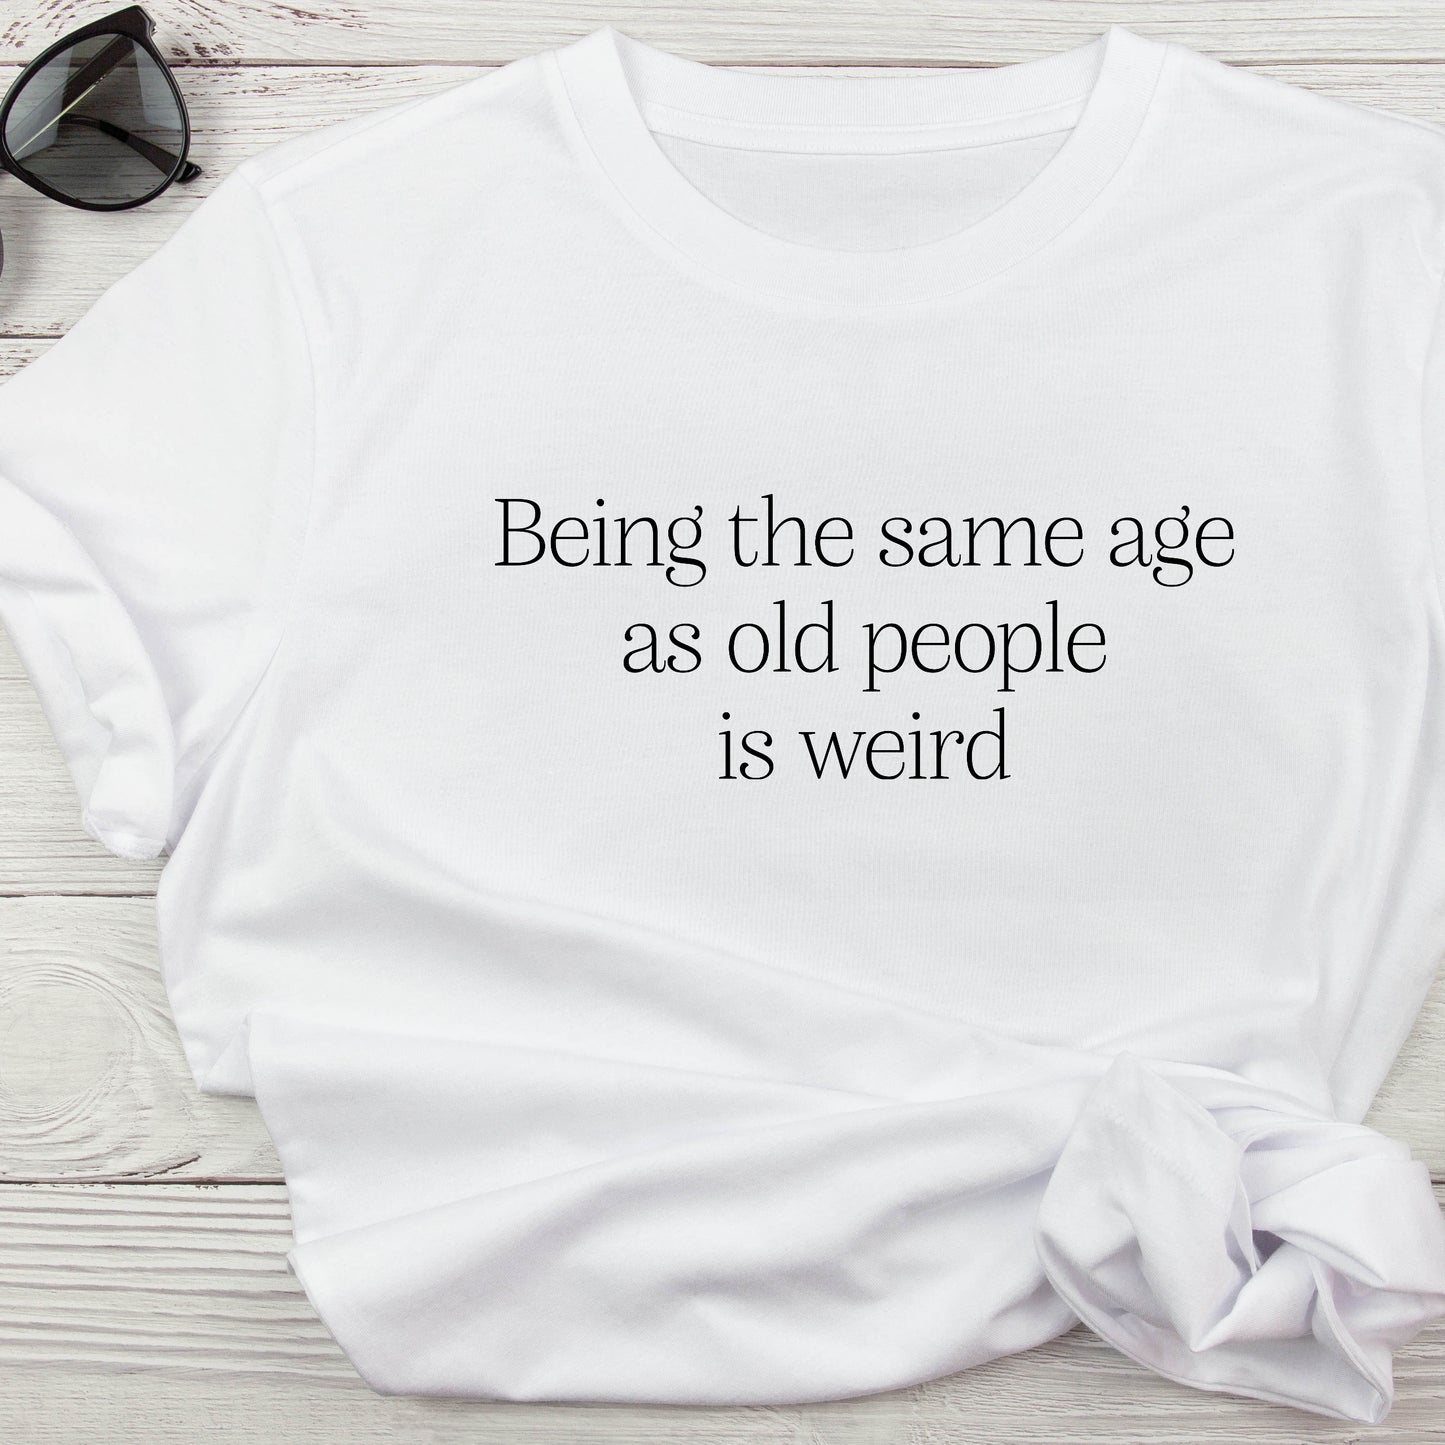 Old People T-Shirt For Sarcastic TShirt For Funny T Shirt For Satire Shirt For Ironic Tee For Birthday Gift For Adult Tee